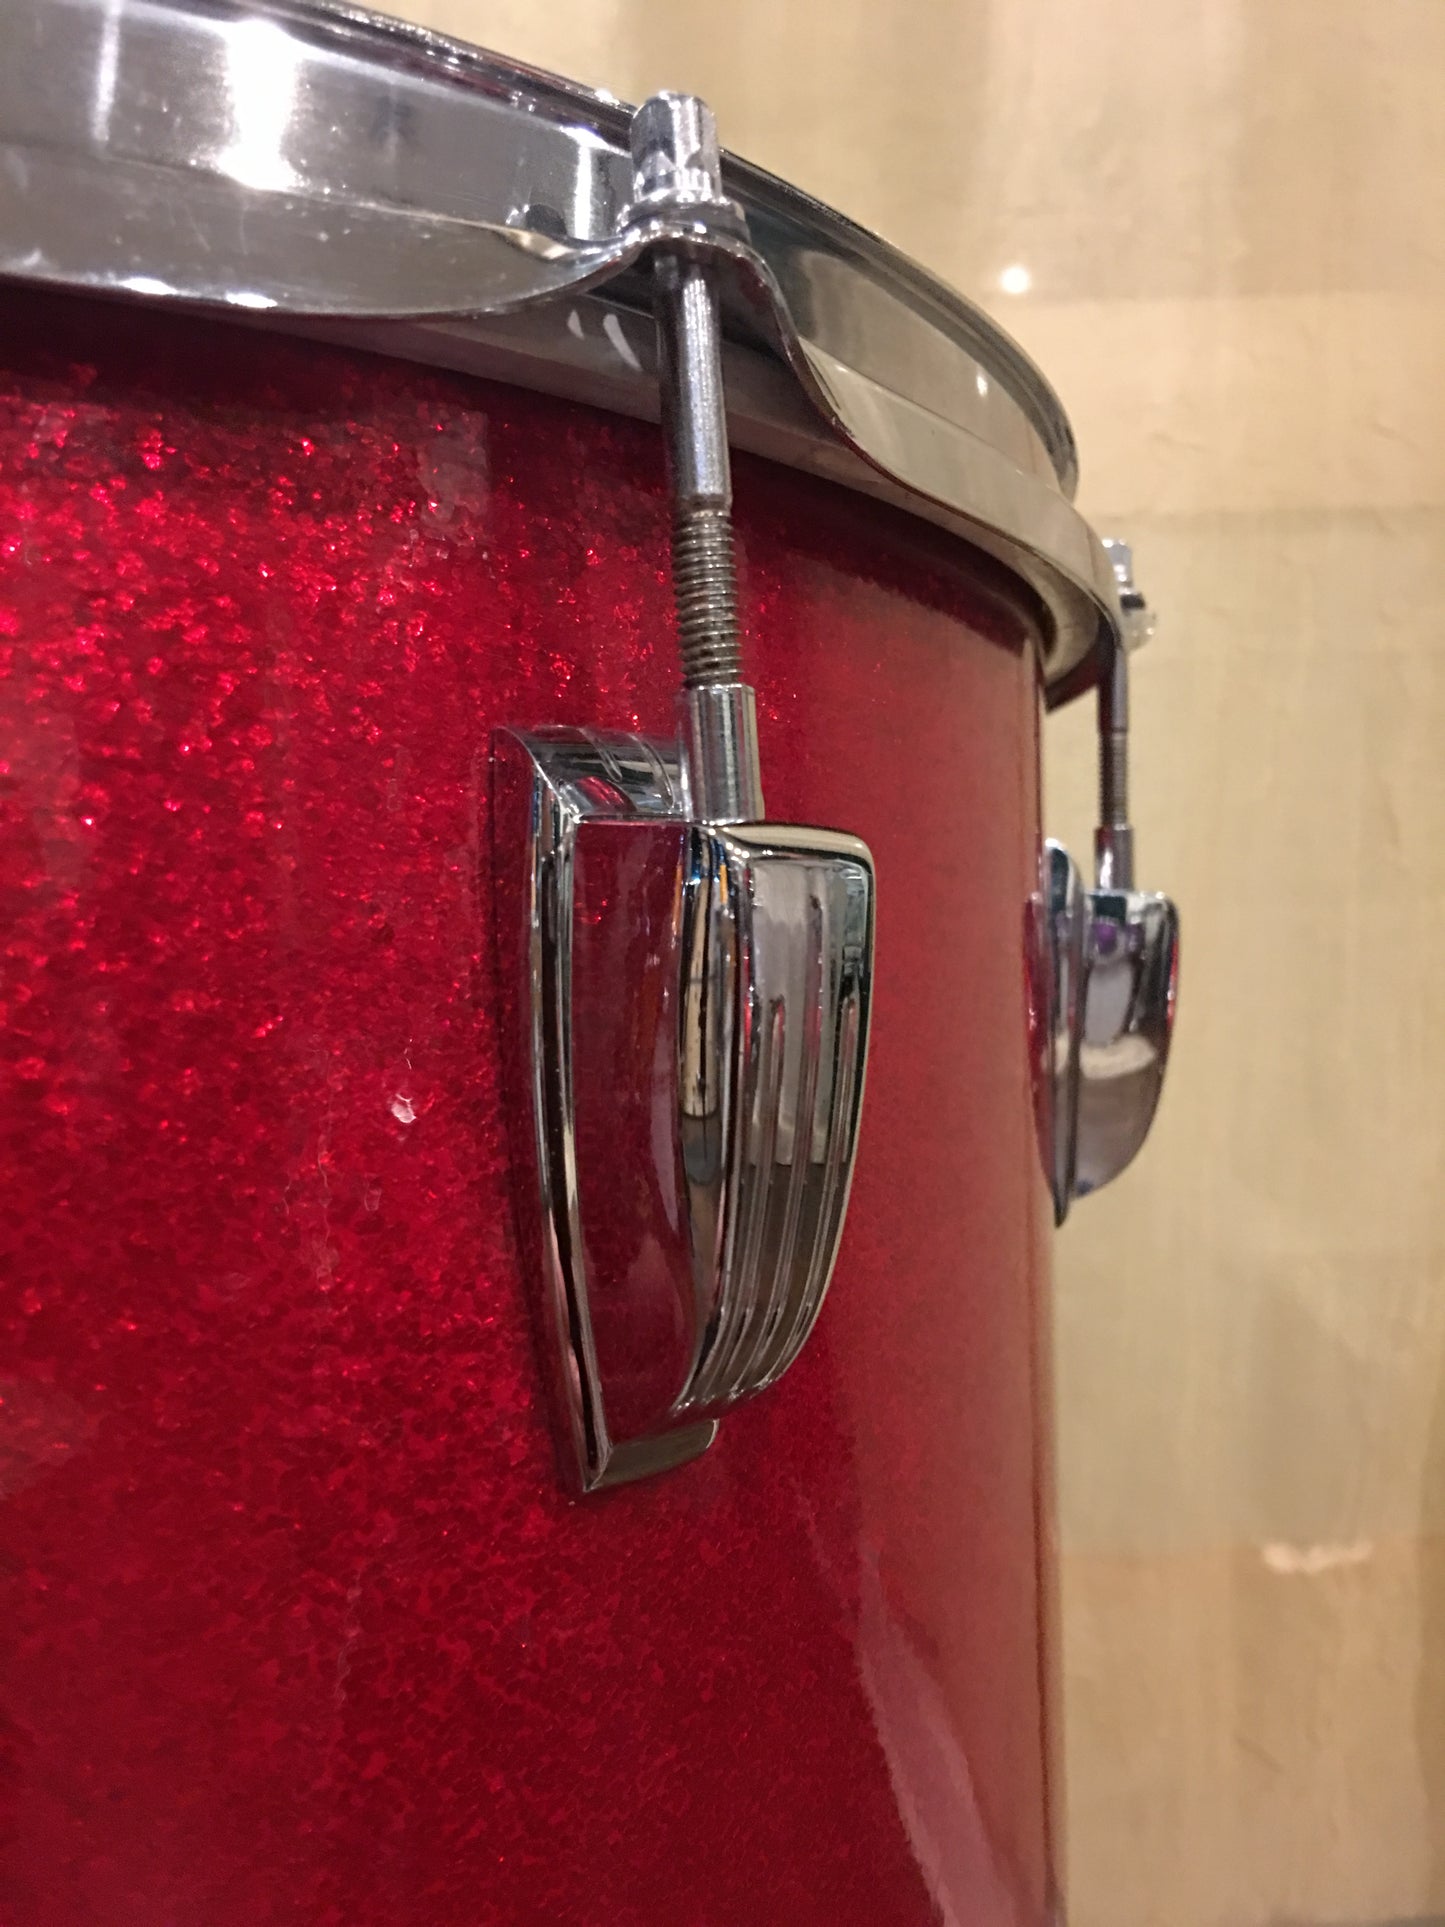 Ludwig 1968 Hollywood Drum Set - Red Sparkle